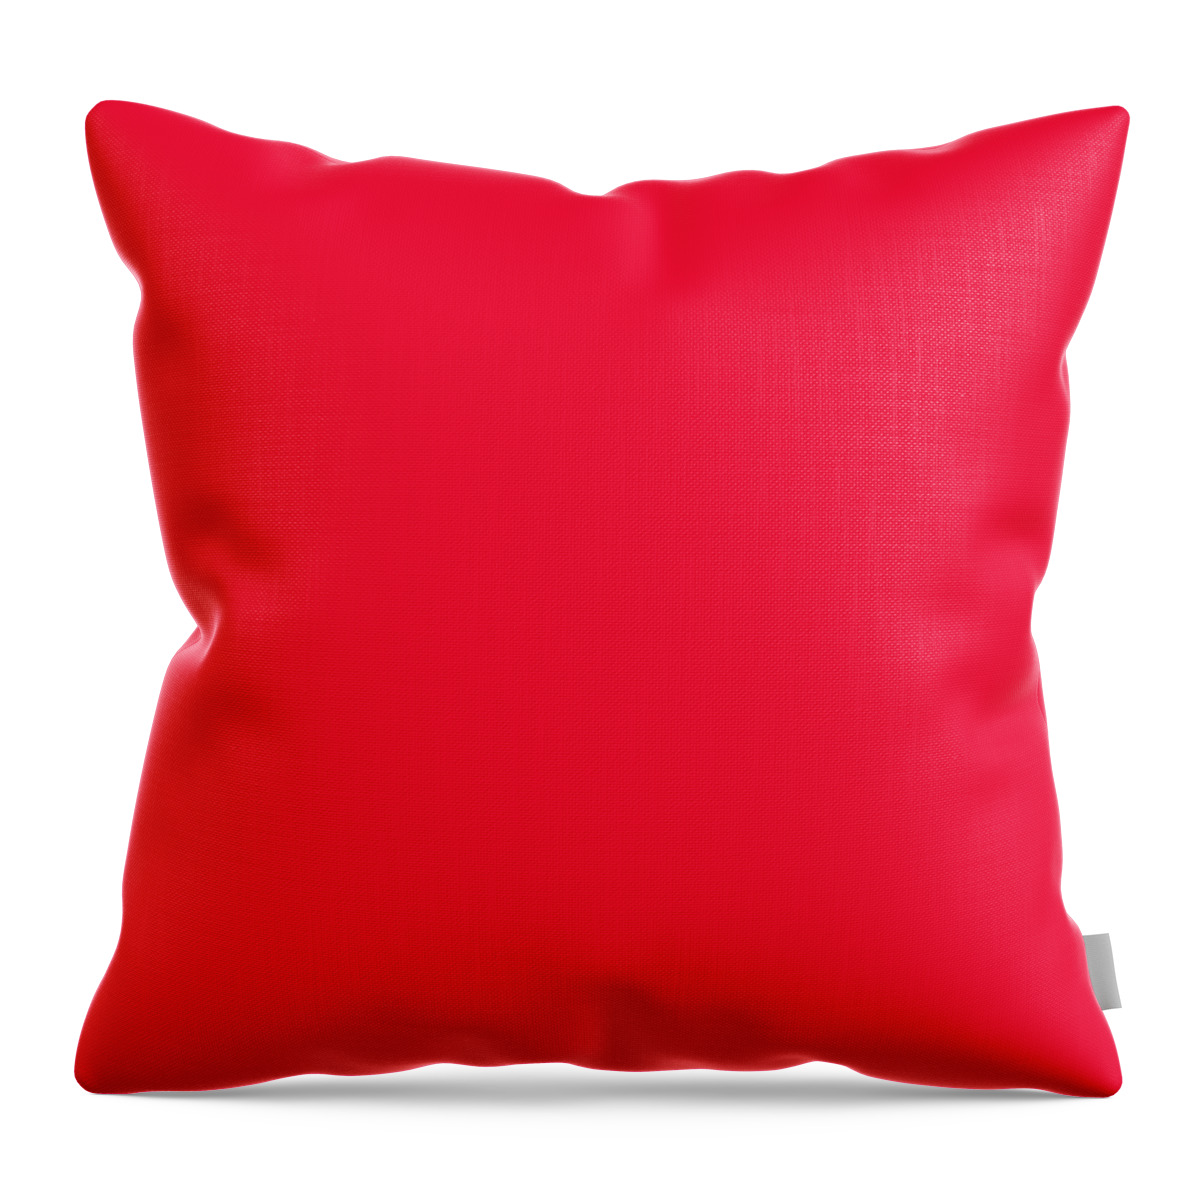 Brake Light Trails Throw Pillow featuring the digital art Brake Light Trails by TintoDesigns